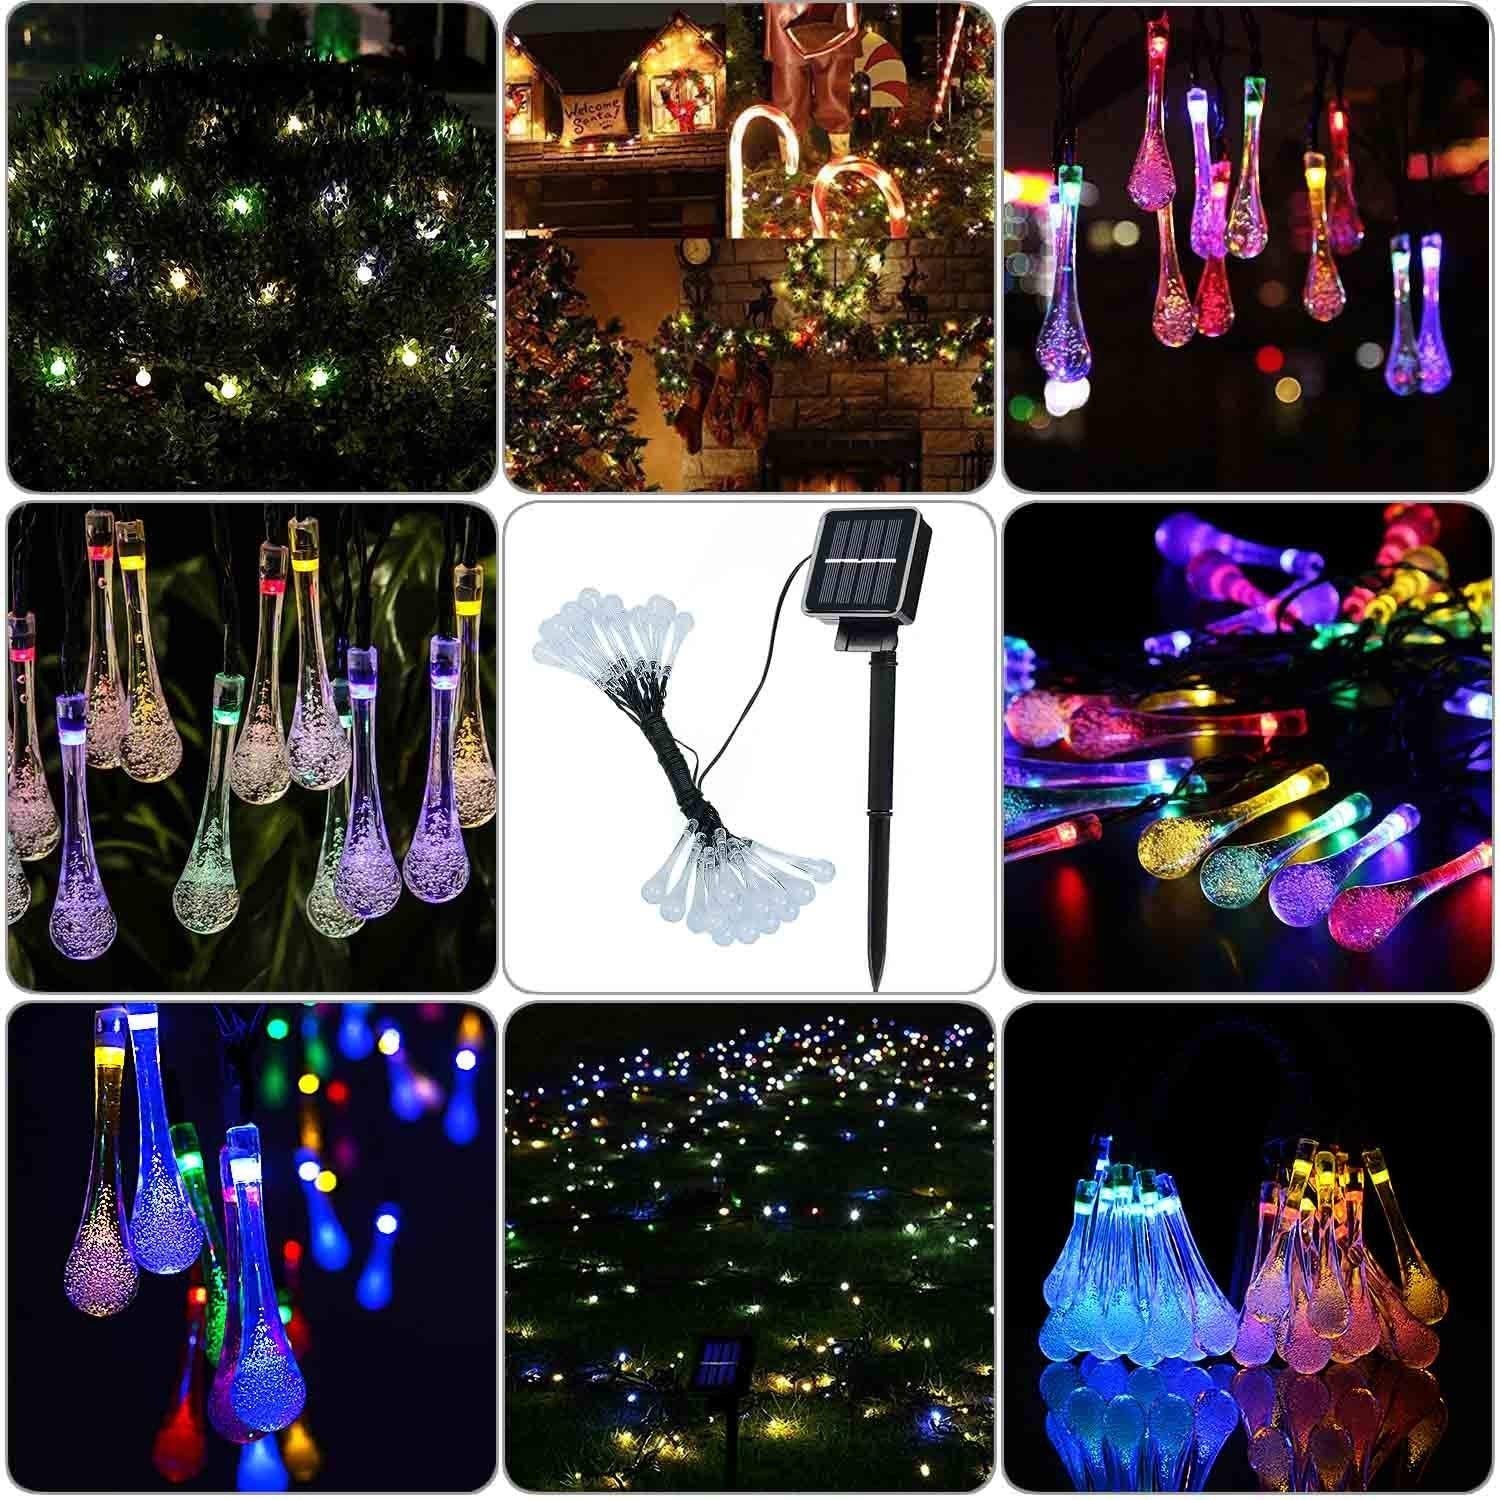 Laighter Solar String Lights, 21 ft 30 LED Water Drop Solar Fairy Waterproof Lights for Garden, Patio, Yard, Home, Parties, 8 Lighting Modes, Multicolor